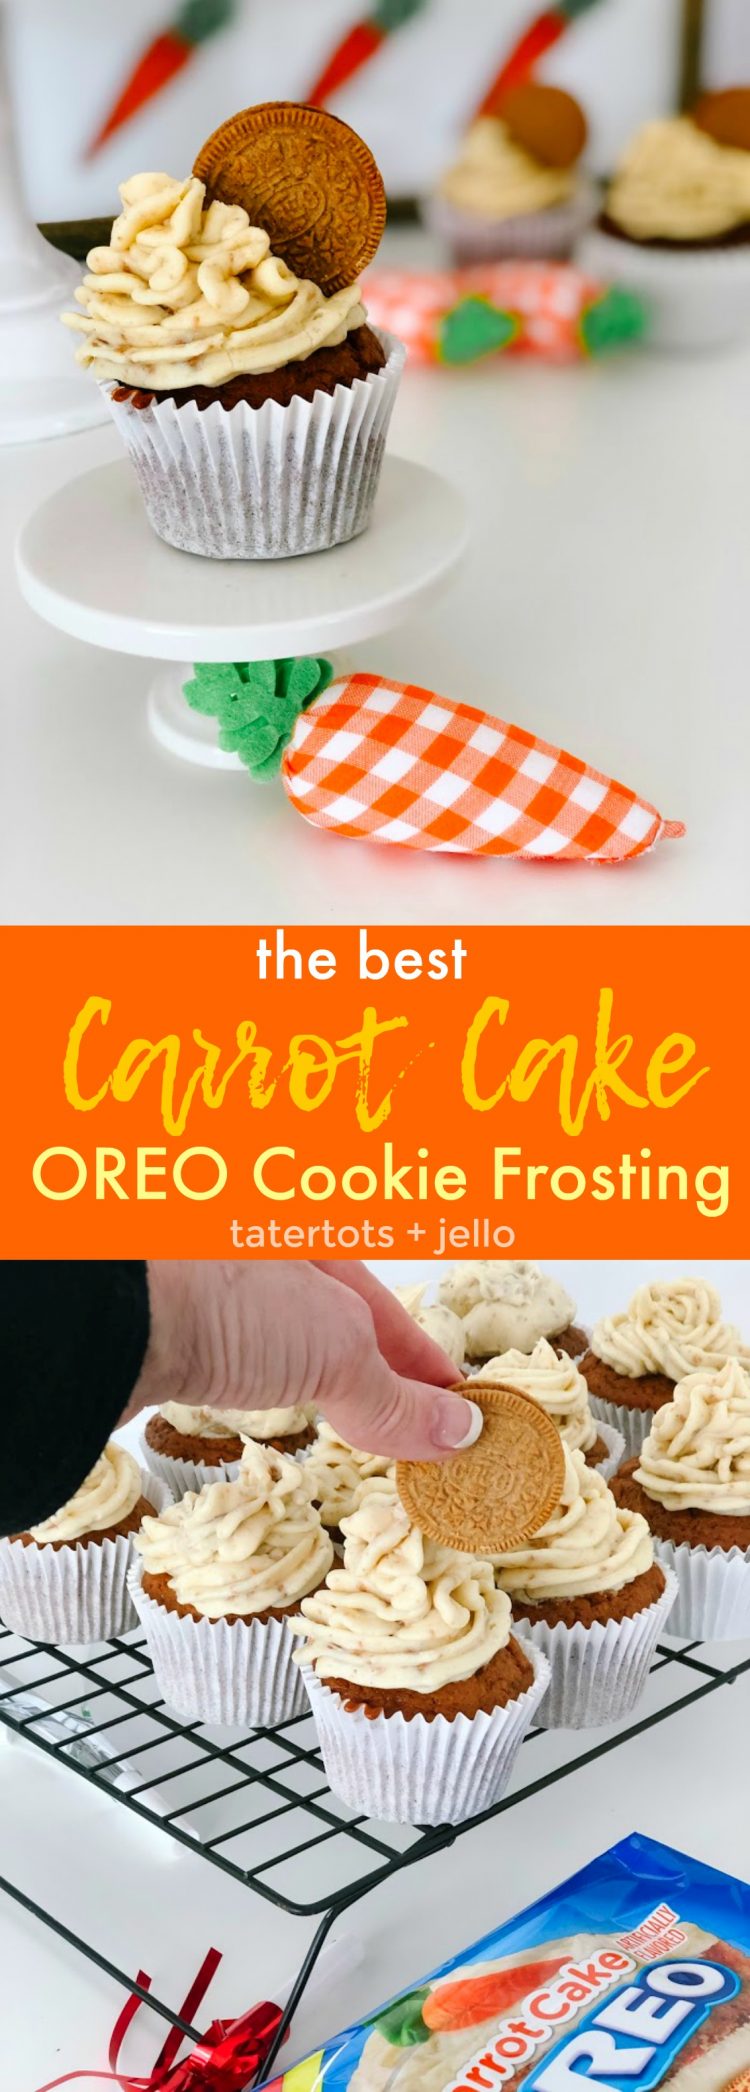 Carrot Cake OREO Buttercream Frosting Recipe. The best buttercream frosting recipe PLUS crushed up Carrot Cake OREO cookies will make your carrot cake cupcakes INSANELY good! 